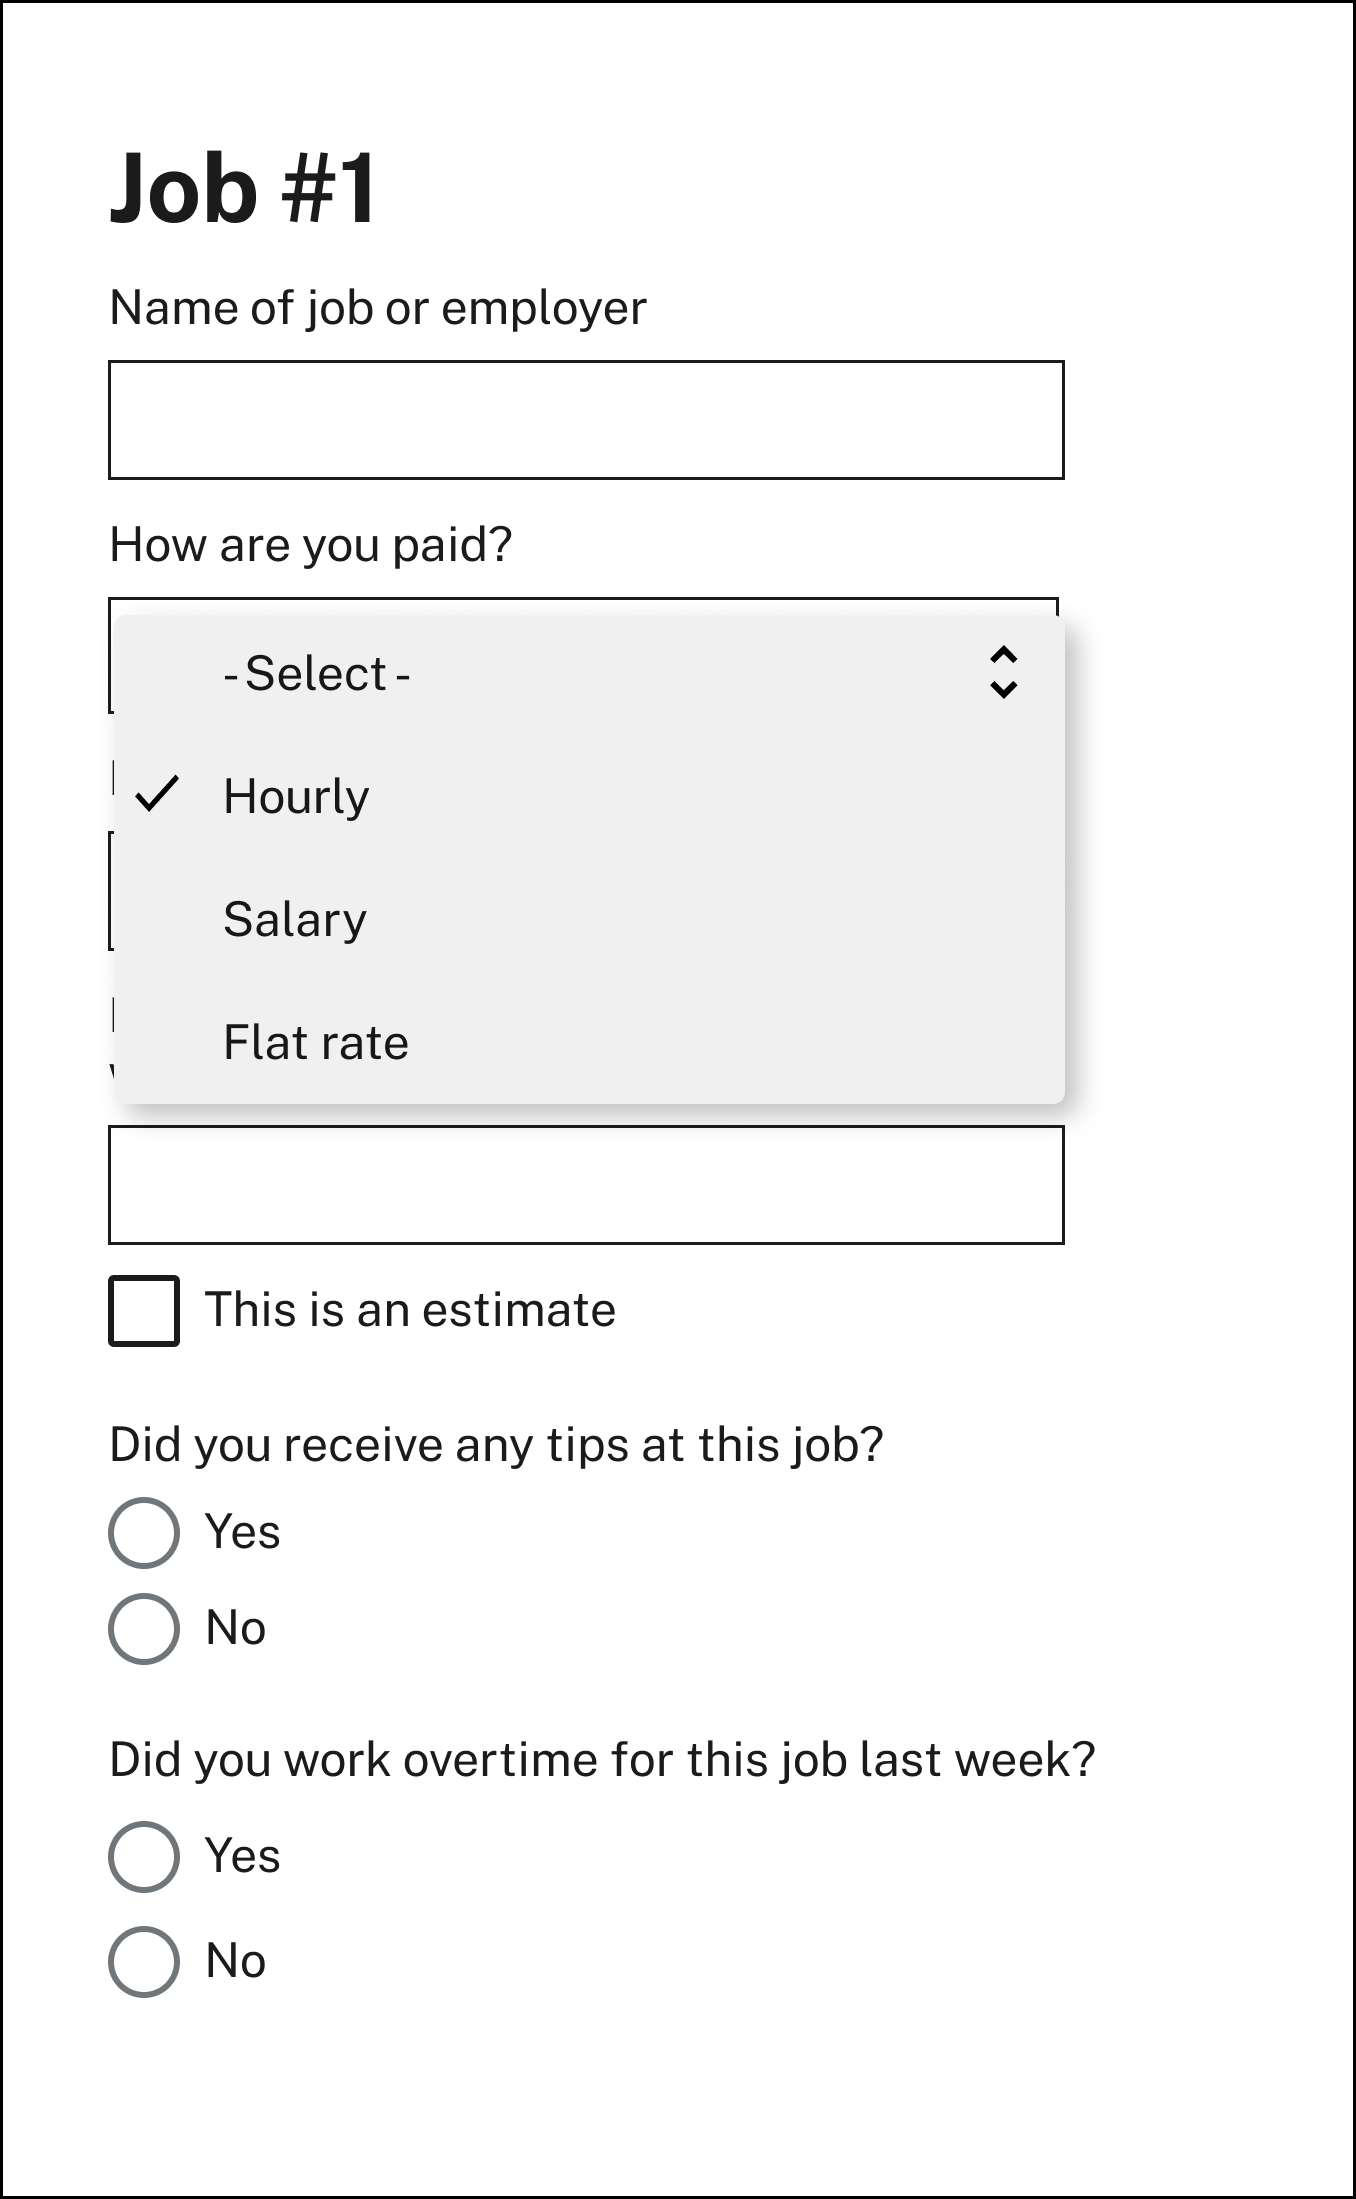 A sample wage calculator to help claimants estimate their wages, including tips and overtime.